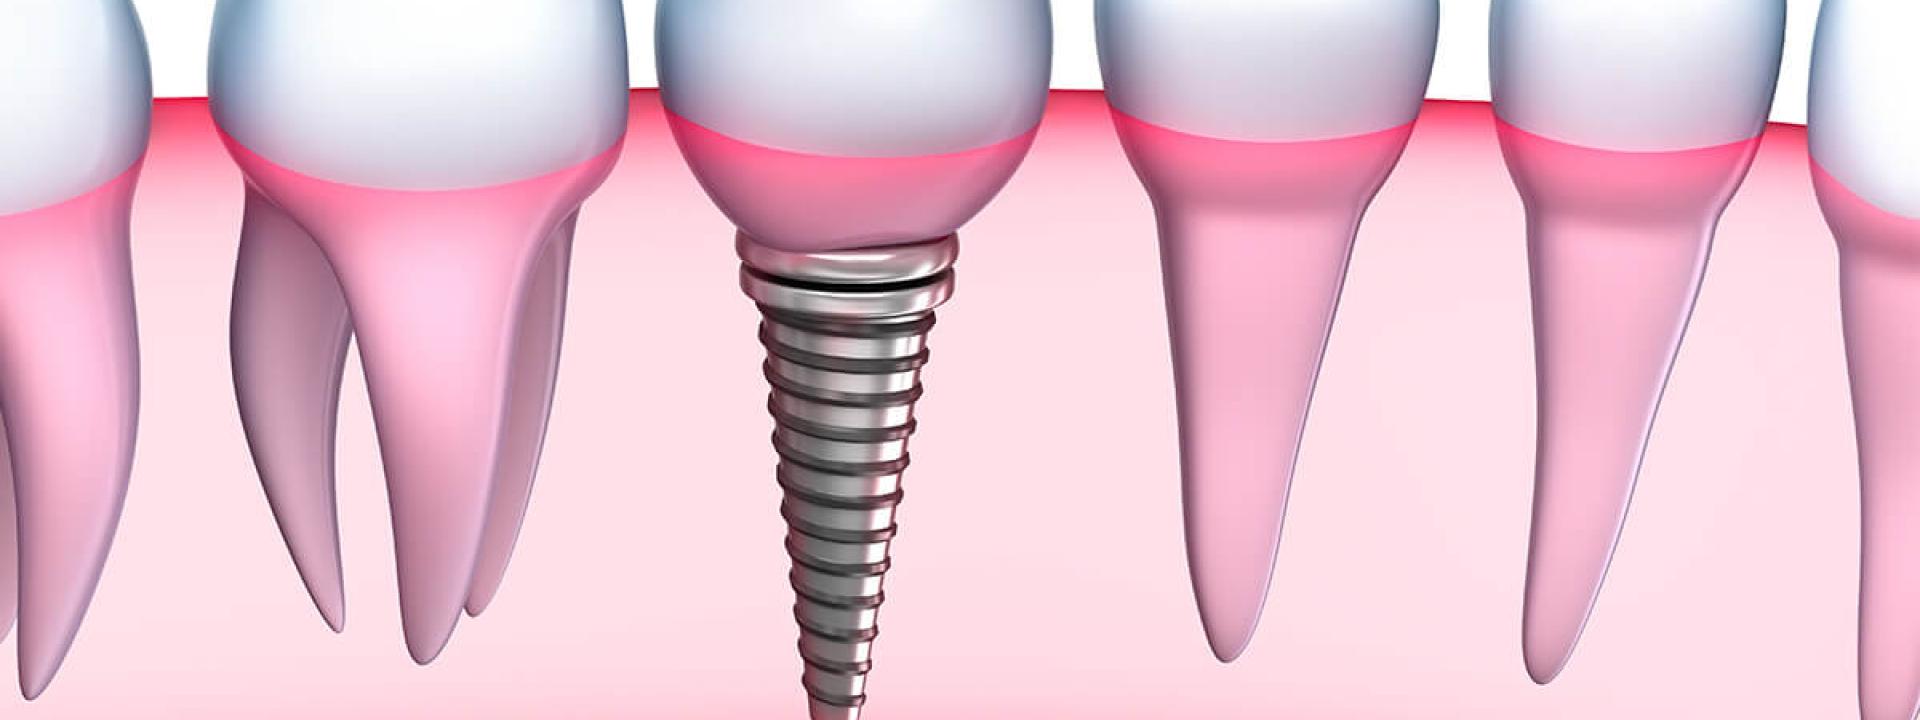 Tooth implant process